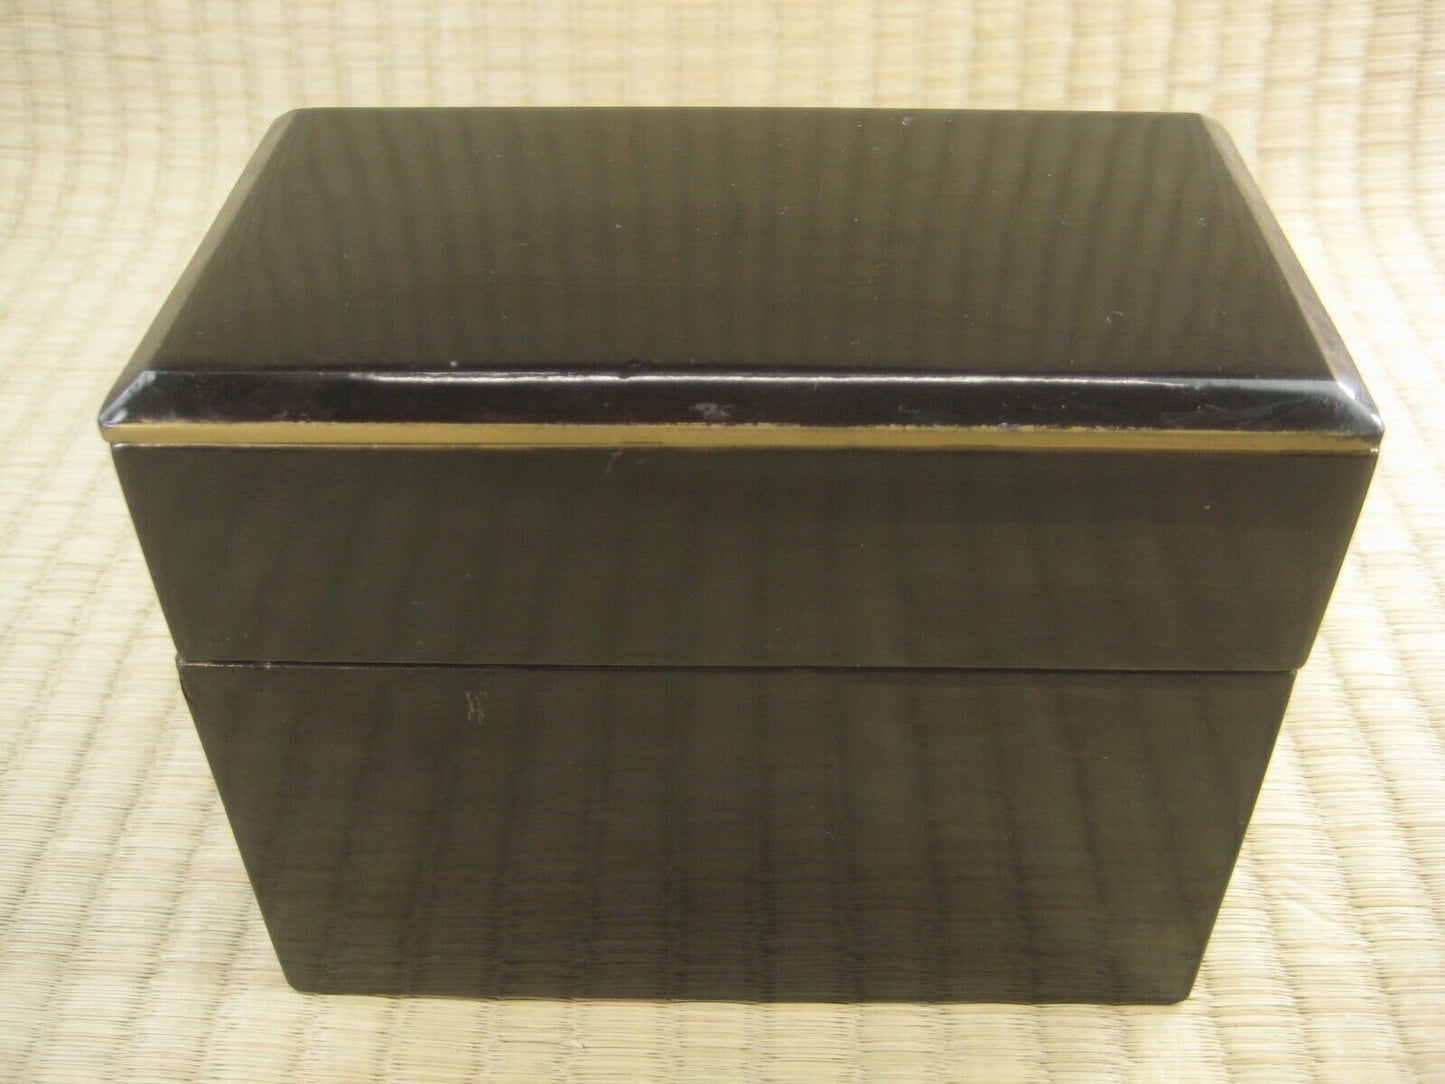 Antique Japanese 3 Compartment Box For Bento Or Storage Black Lacquer Gold Trim